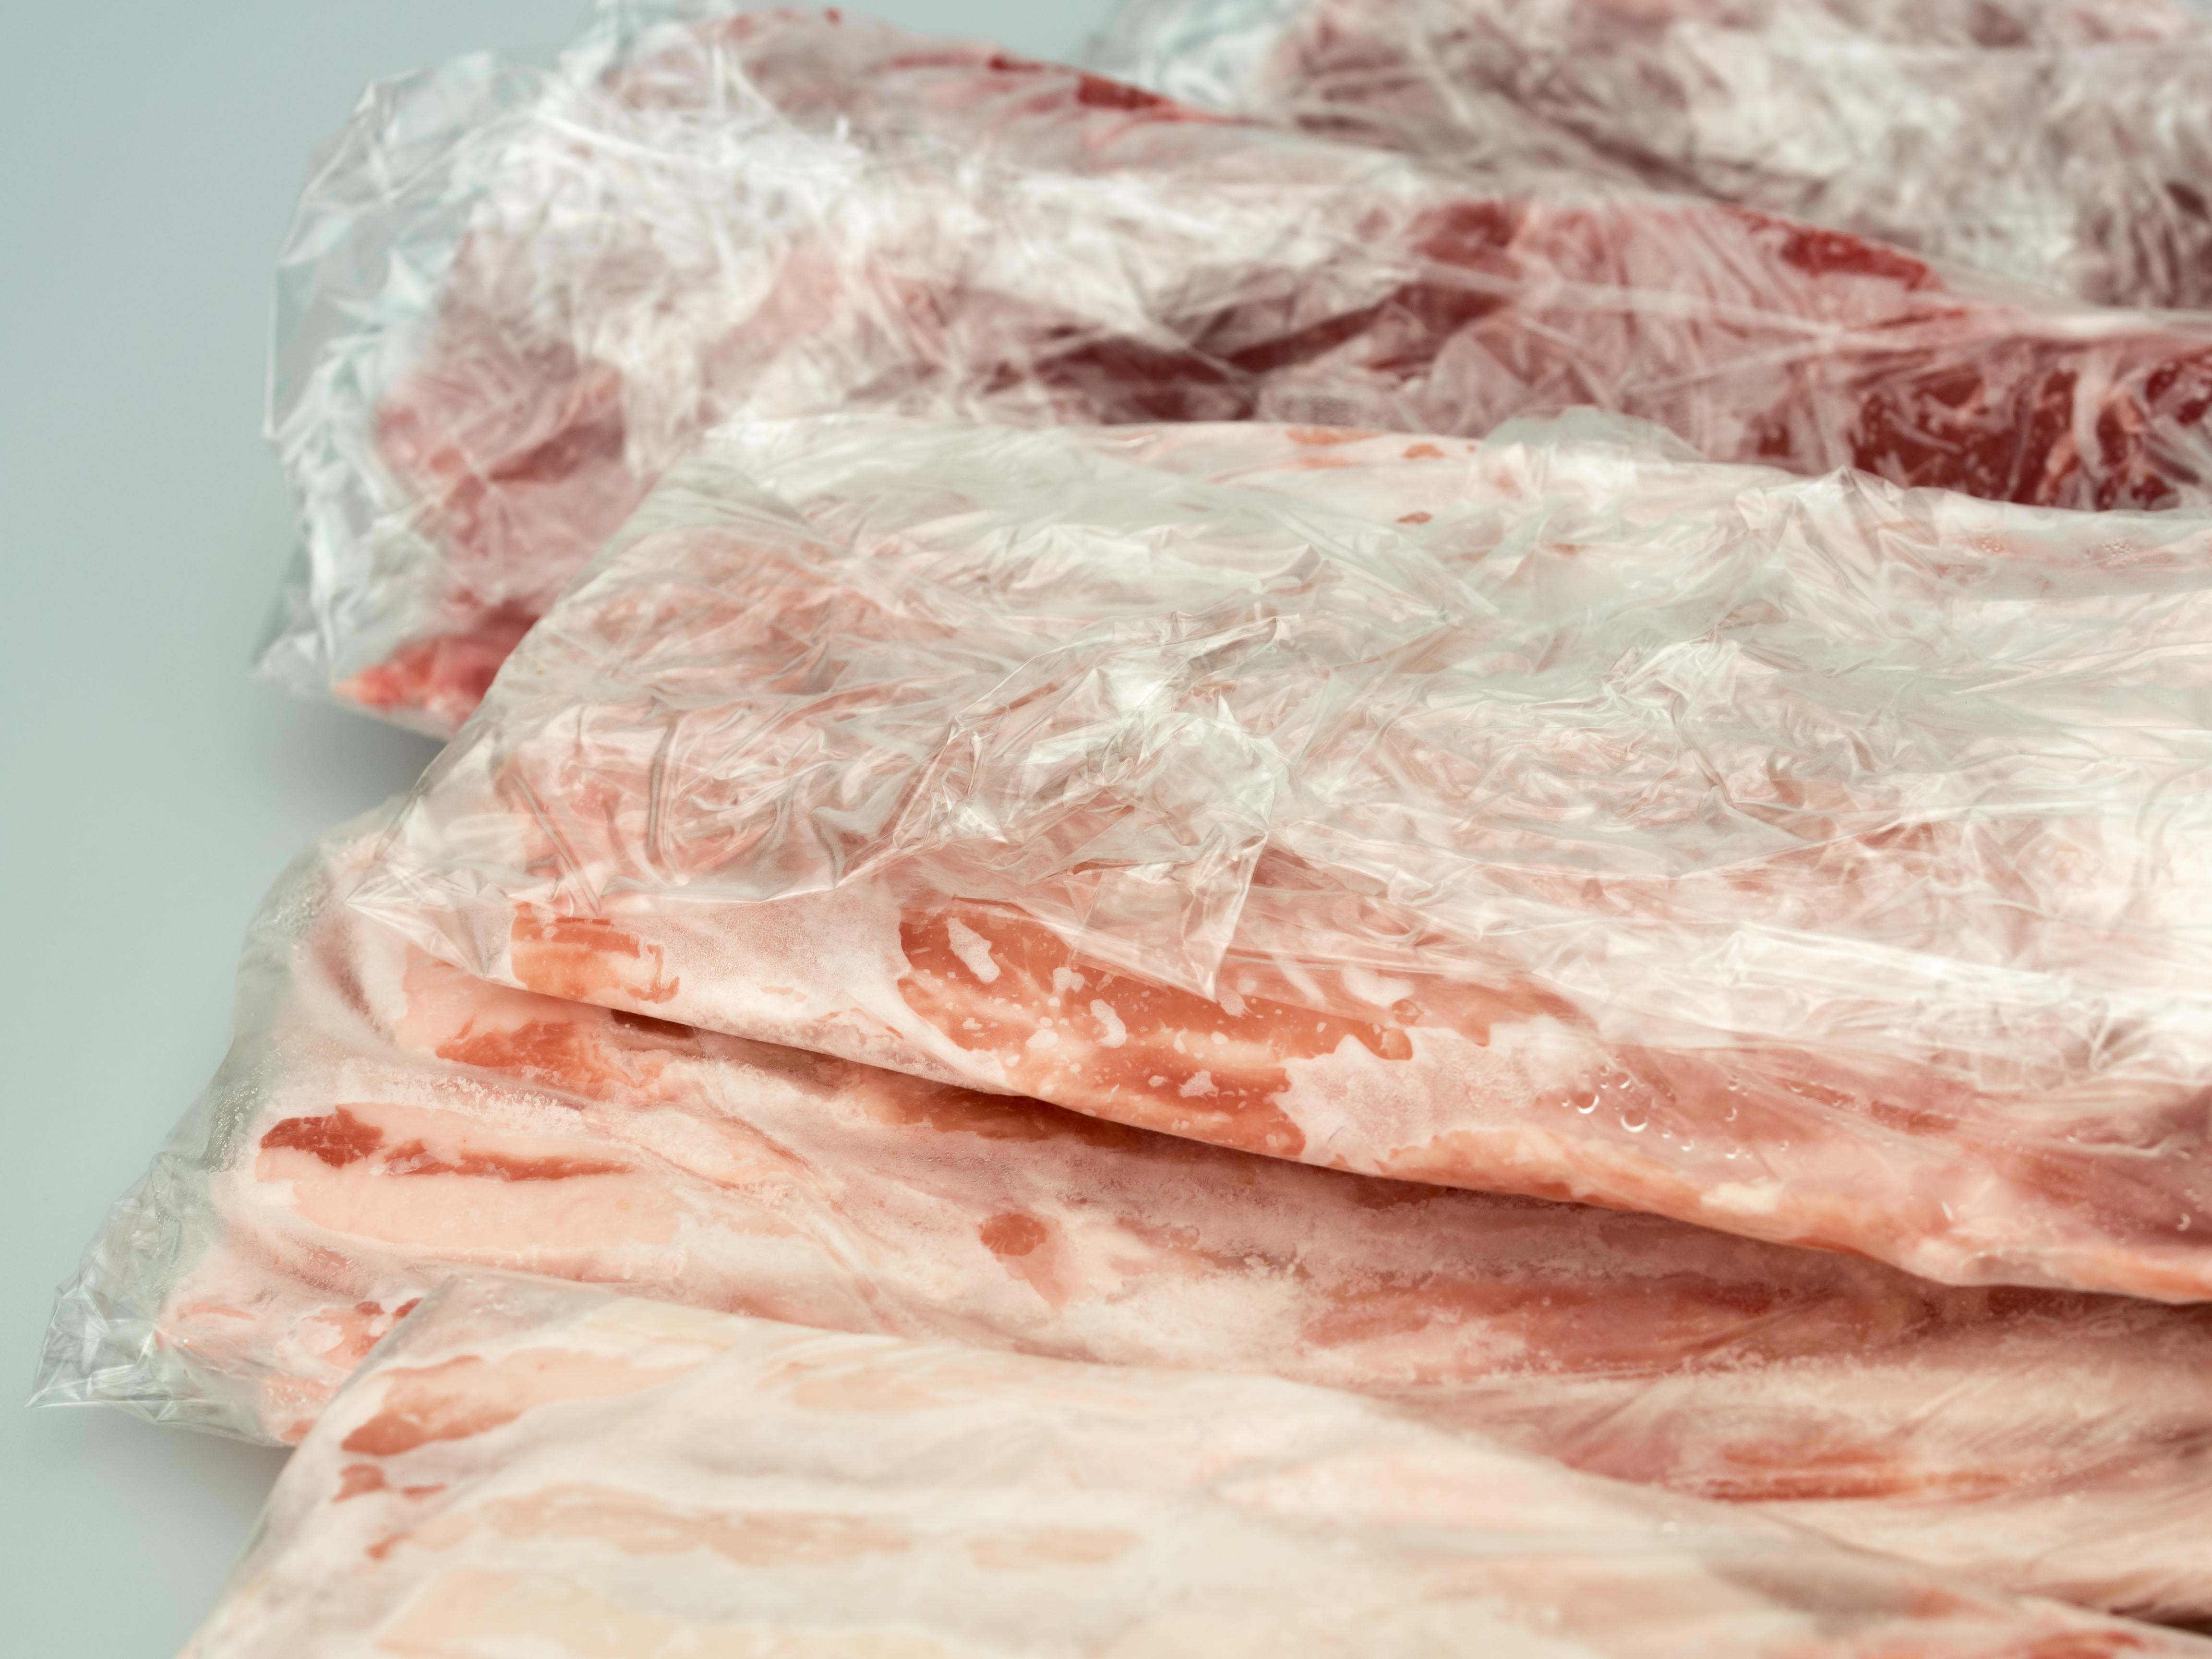 frozen meat in plastic package isolated on white background